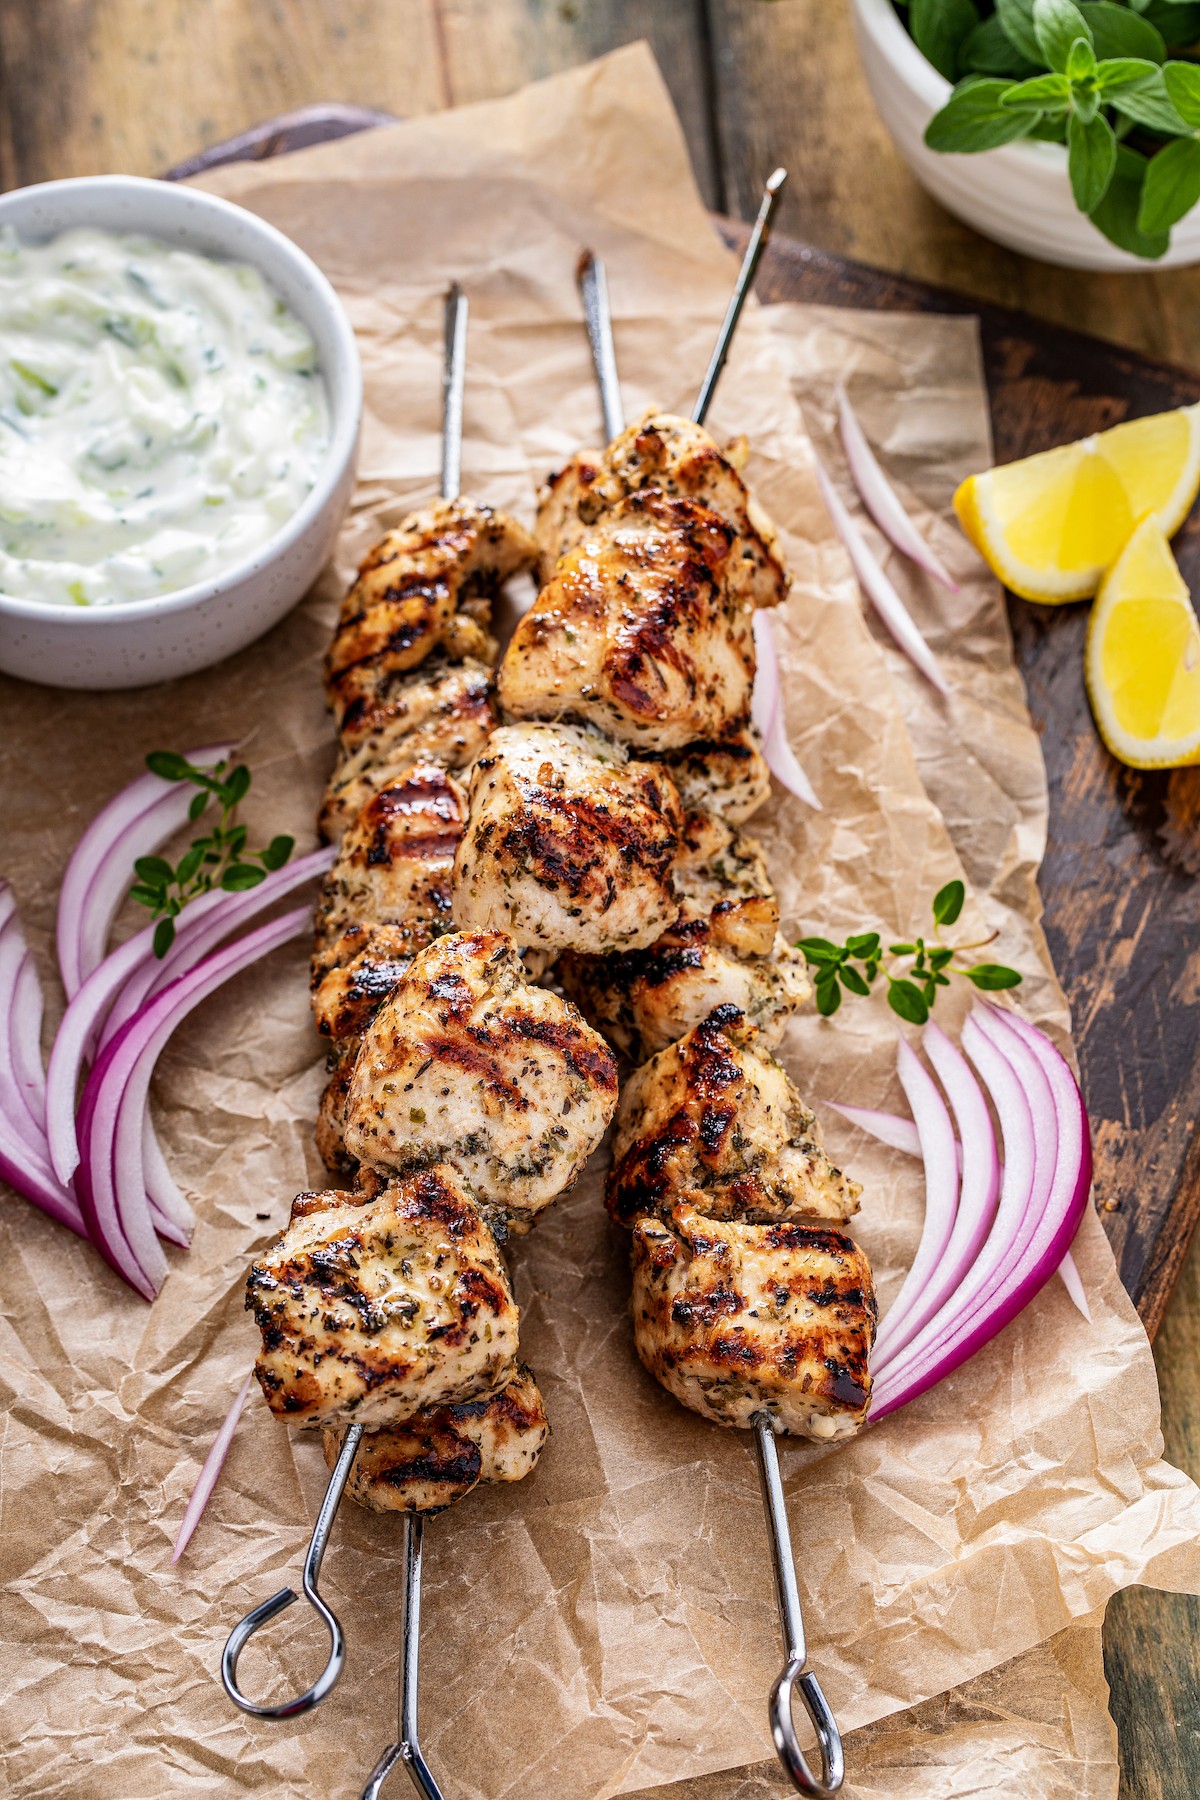 Grilled chicken on skewers next to red onion.